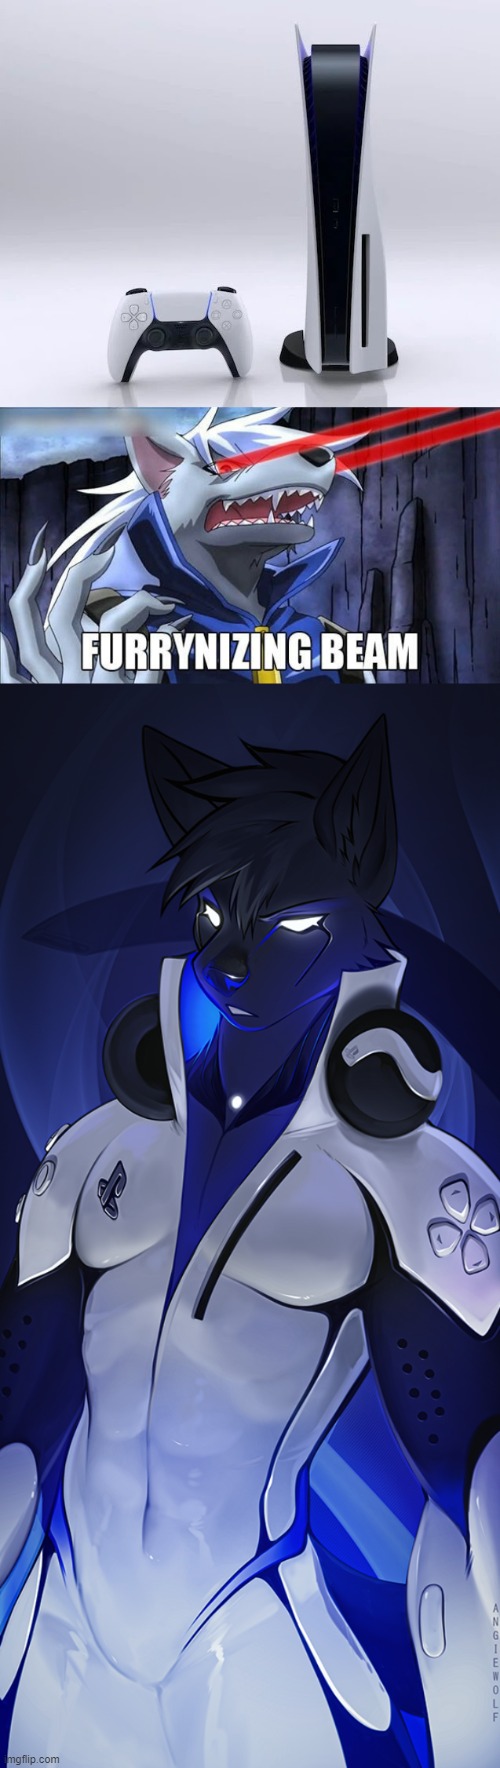 Well damn! I'll play that! | image tagged in ps5,furrynizing beam,memes,furry,playstation | made w/ Imgflip meme maker